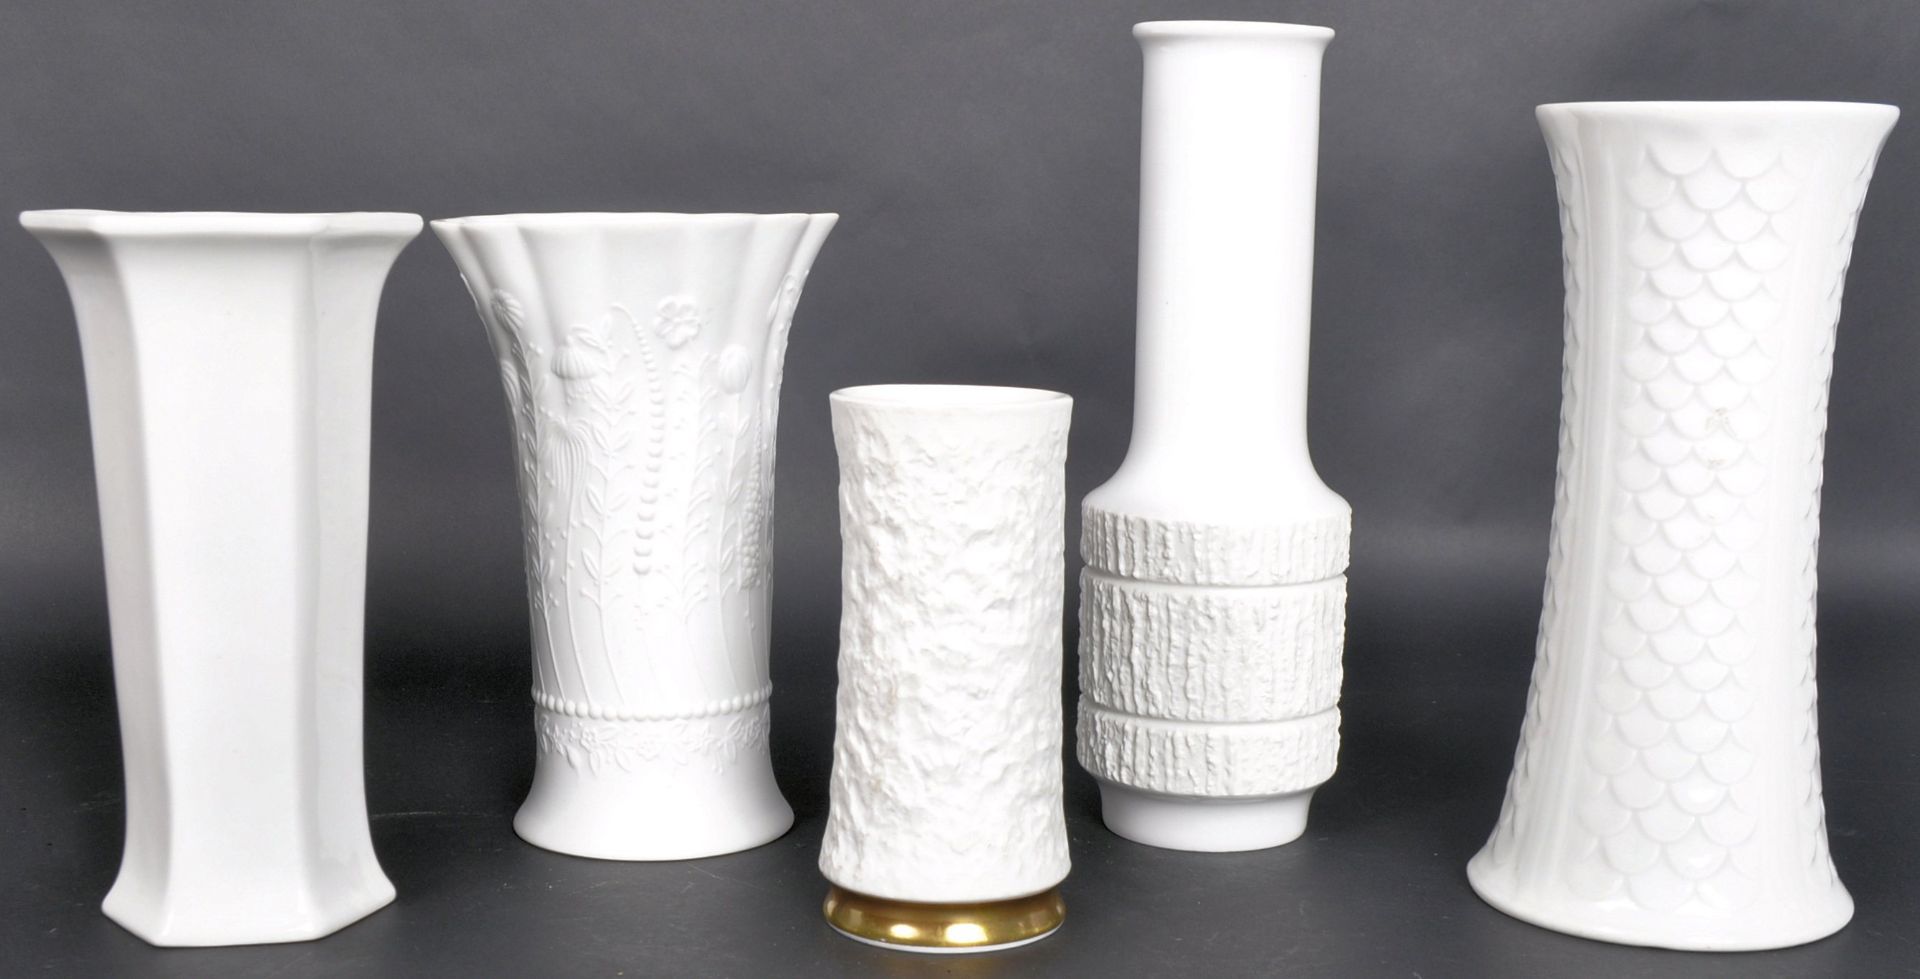 COLLECTION OF MID 20TH CENTURY GERMAN WHITE PORCELAIN VASES